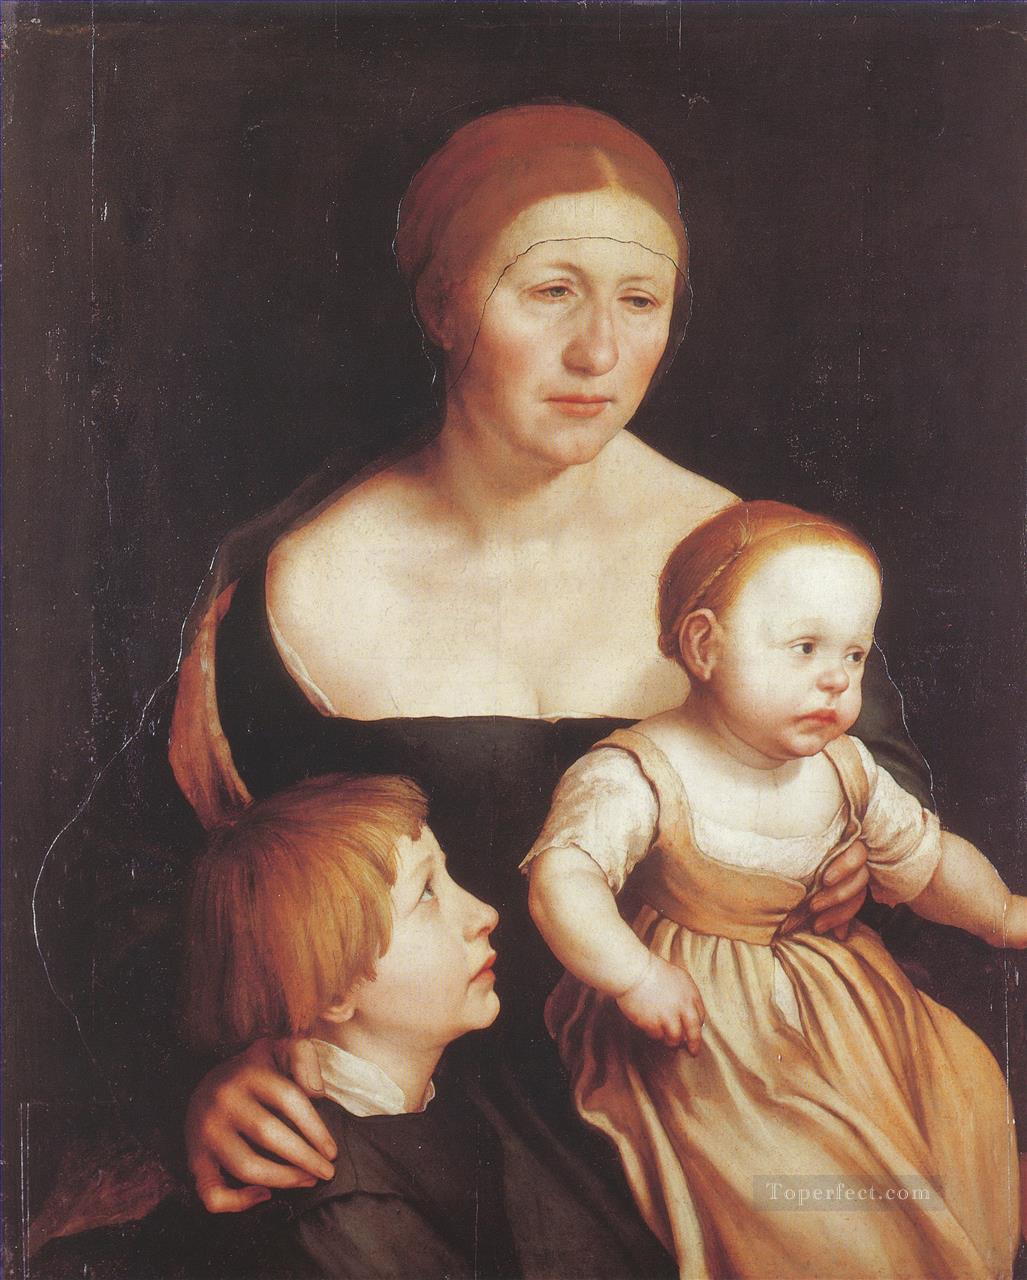 Hans Holbein the Younger: Portrait of Mrs. Holbein with the Children, Katharina and Philipp